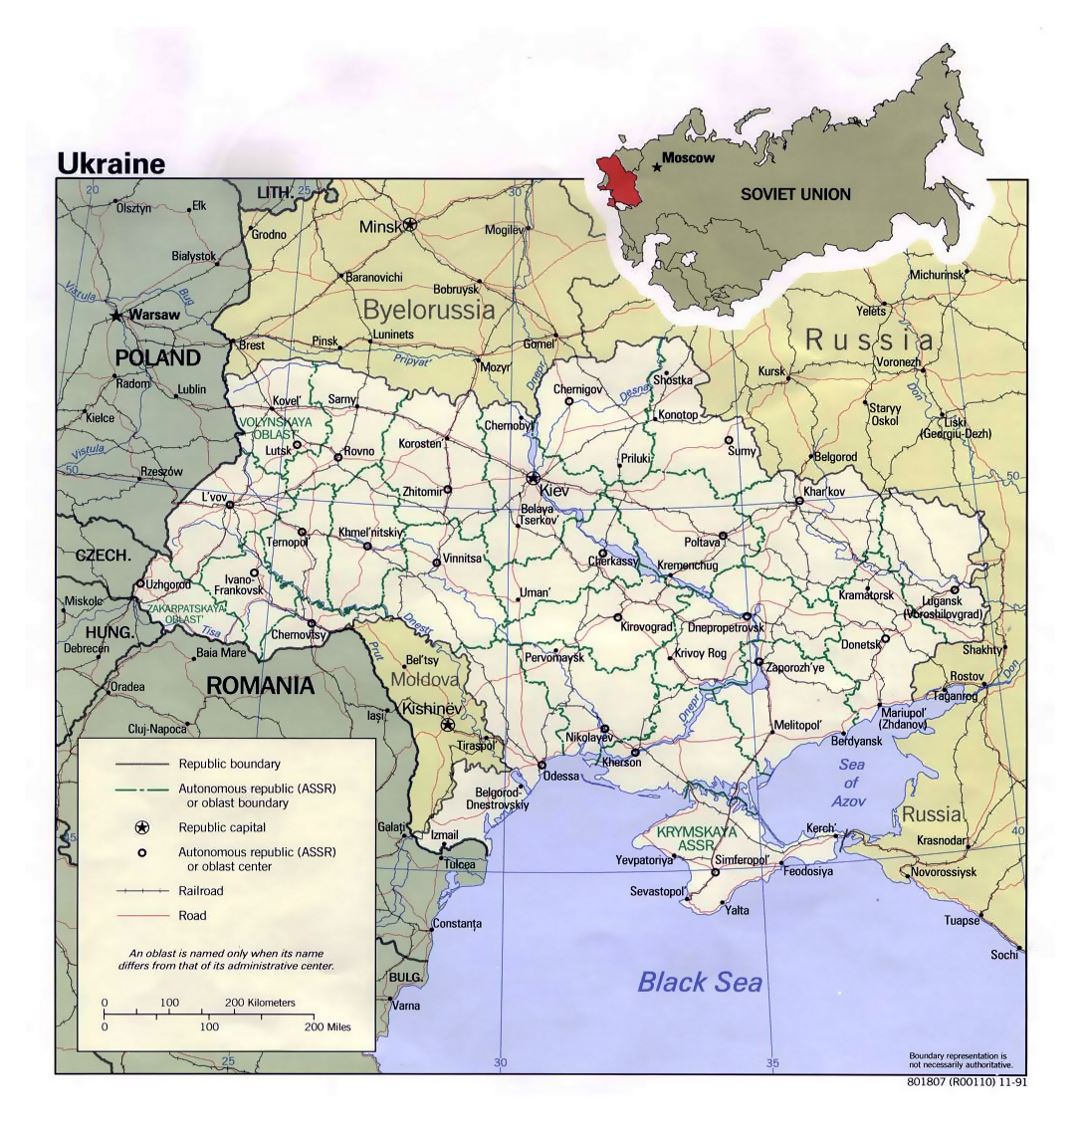 Detailed political and administrative map of Ukraine with roads, railroads and major cities - 1991